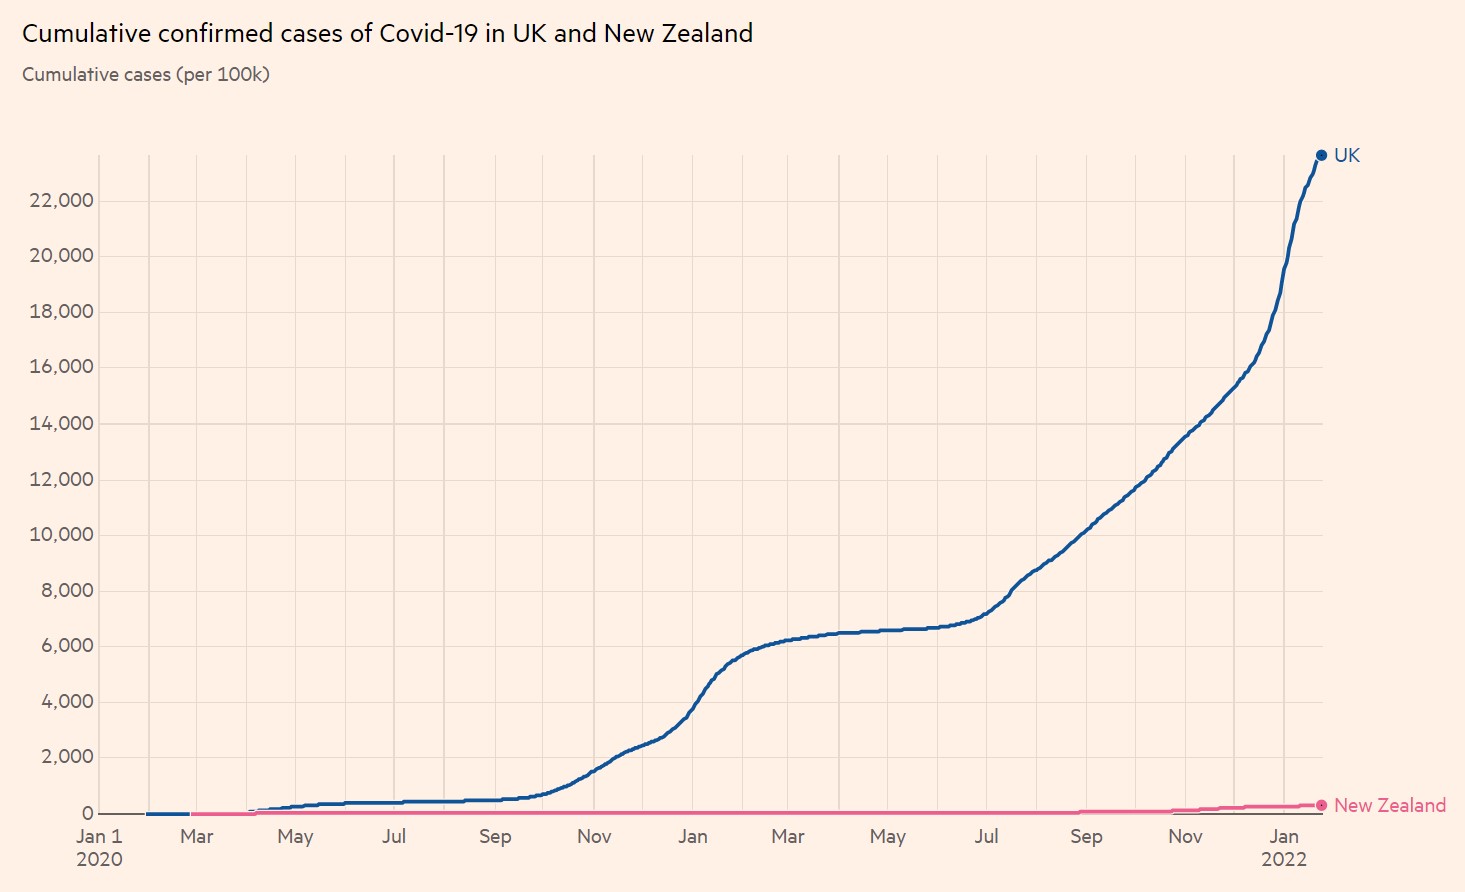 FT-Johns Hopkins cumulative confirmed cases of Covid-19 in UK and New Zealand 24-1-2022 - enlarge